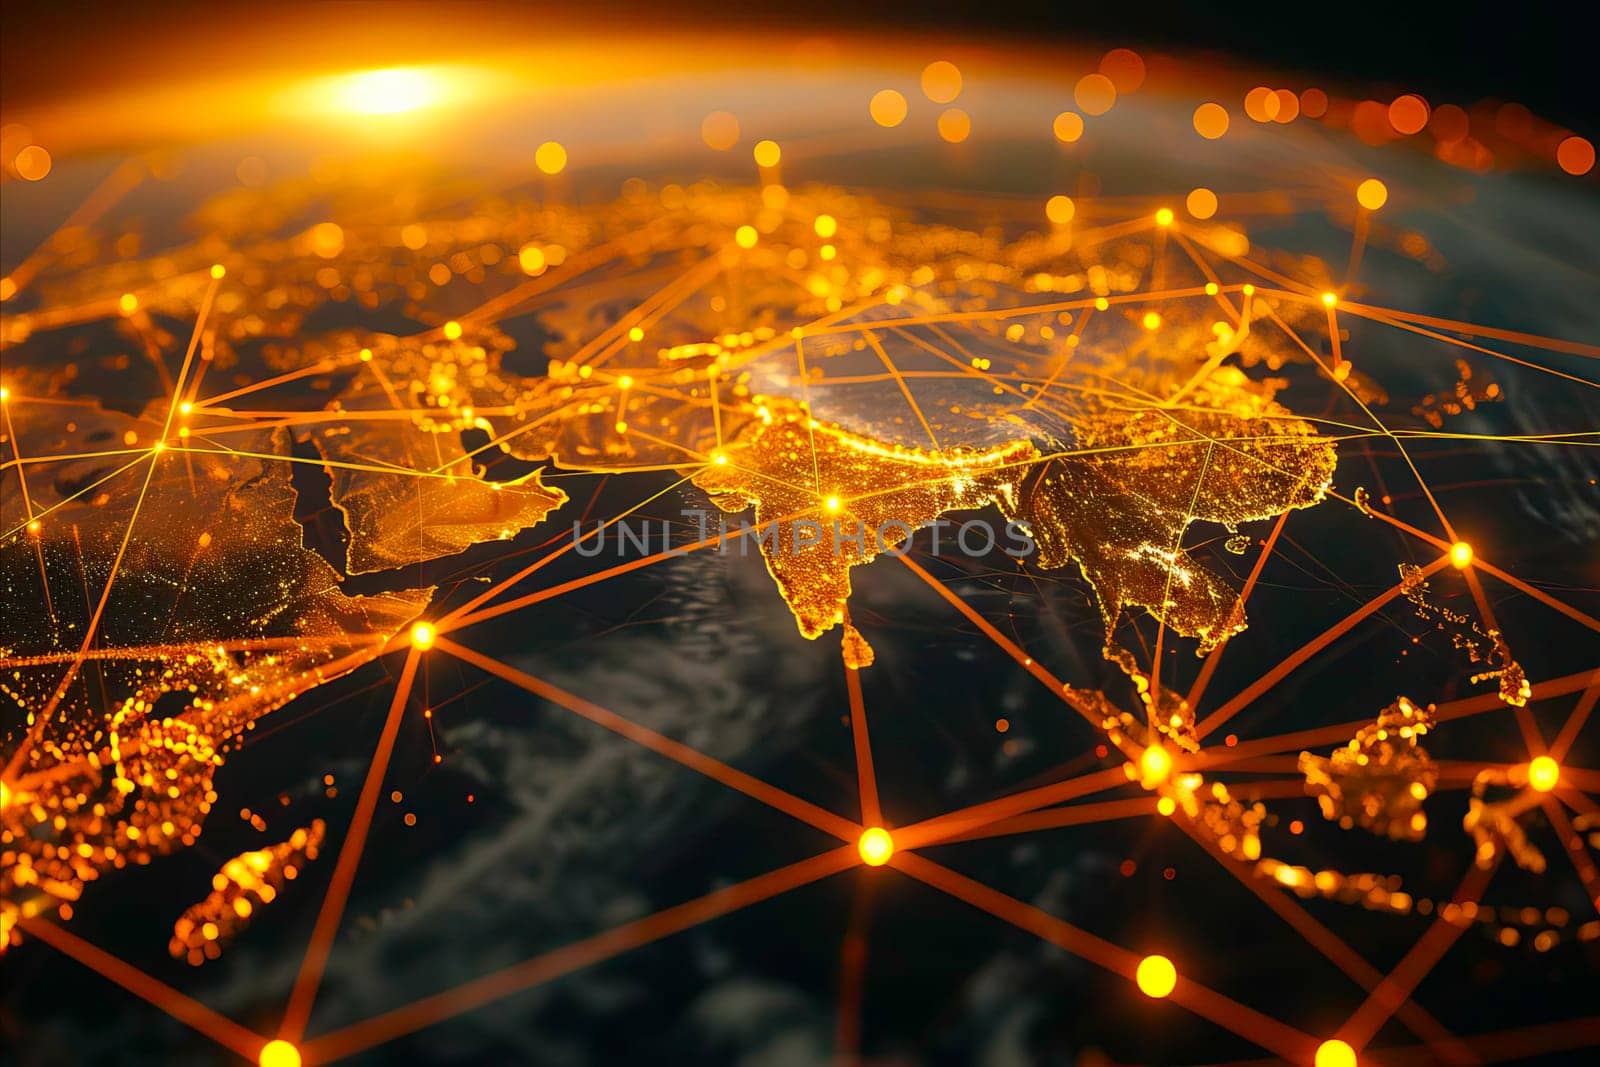 A Vivid Map of the World Illuminated by Lights With Internet Network Connection Lines. by vladimka